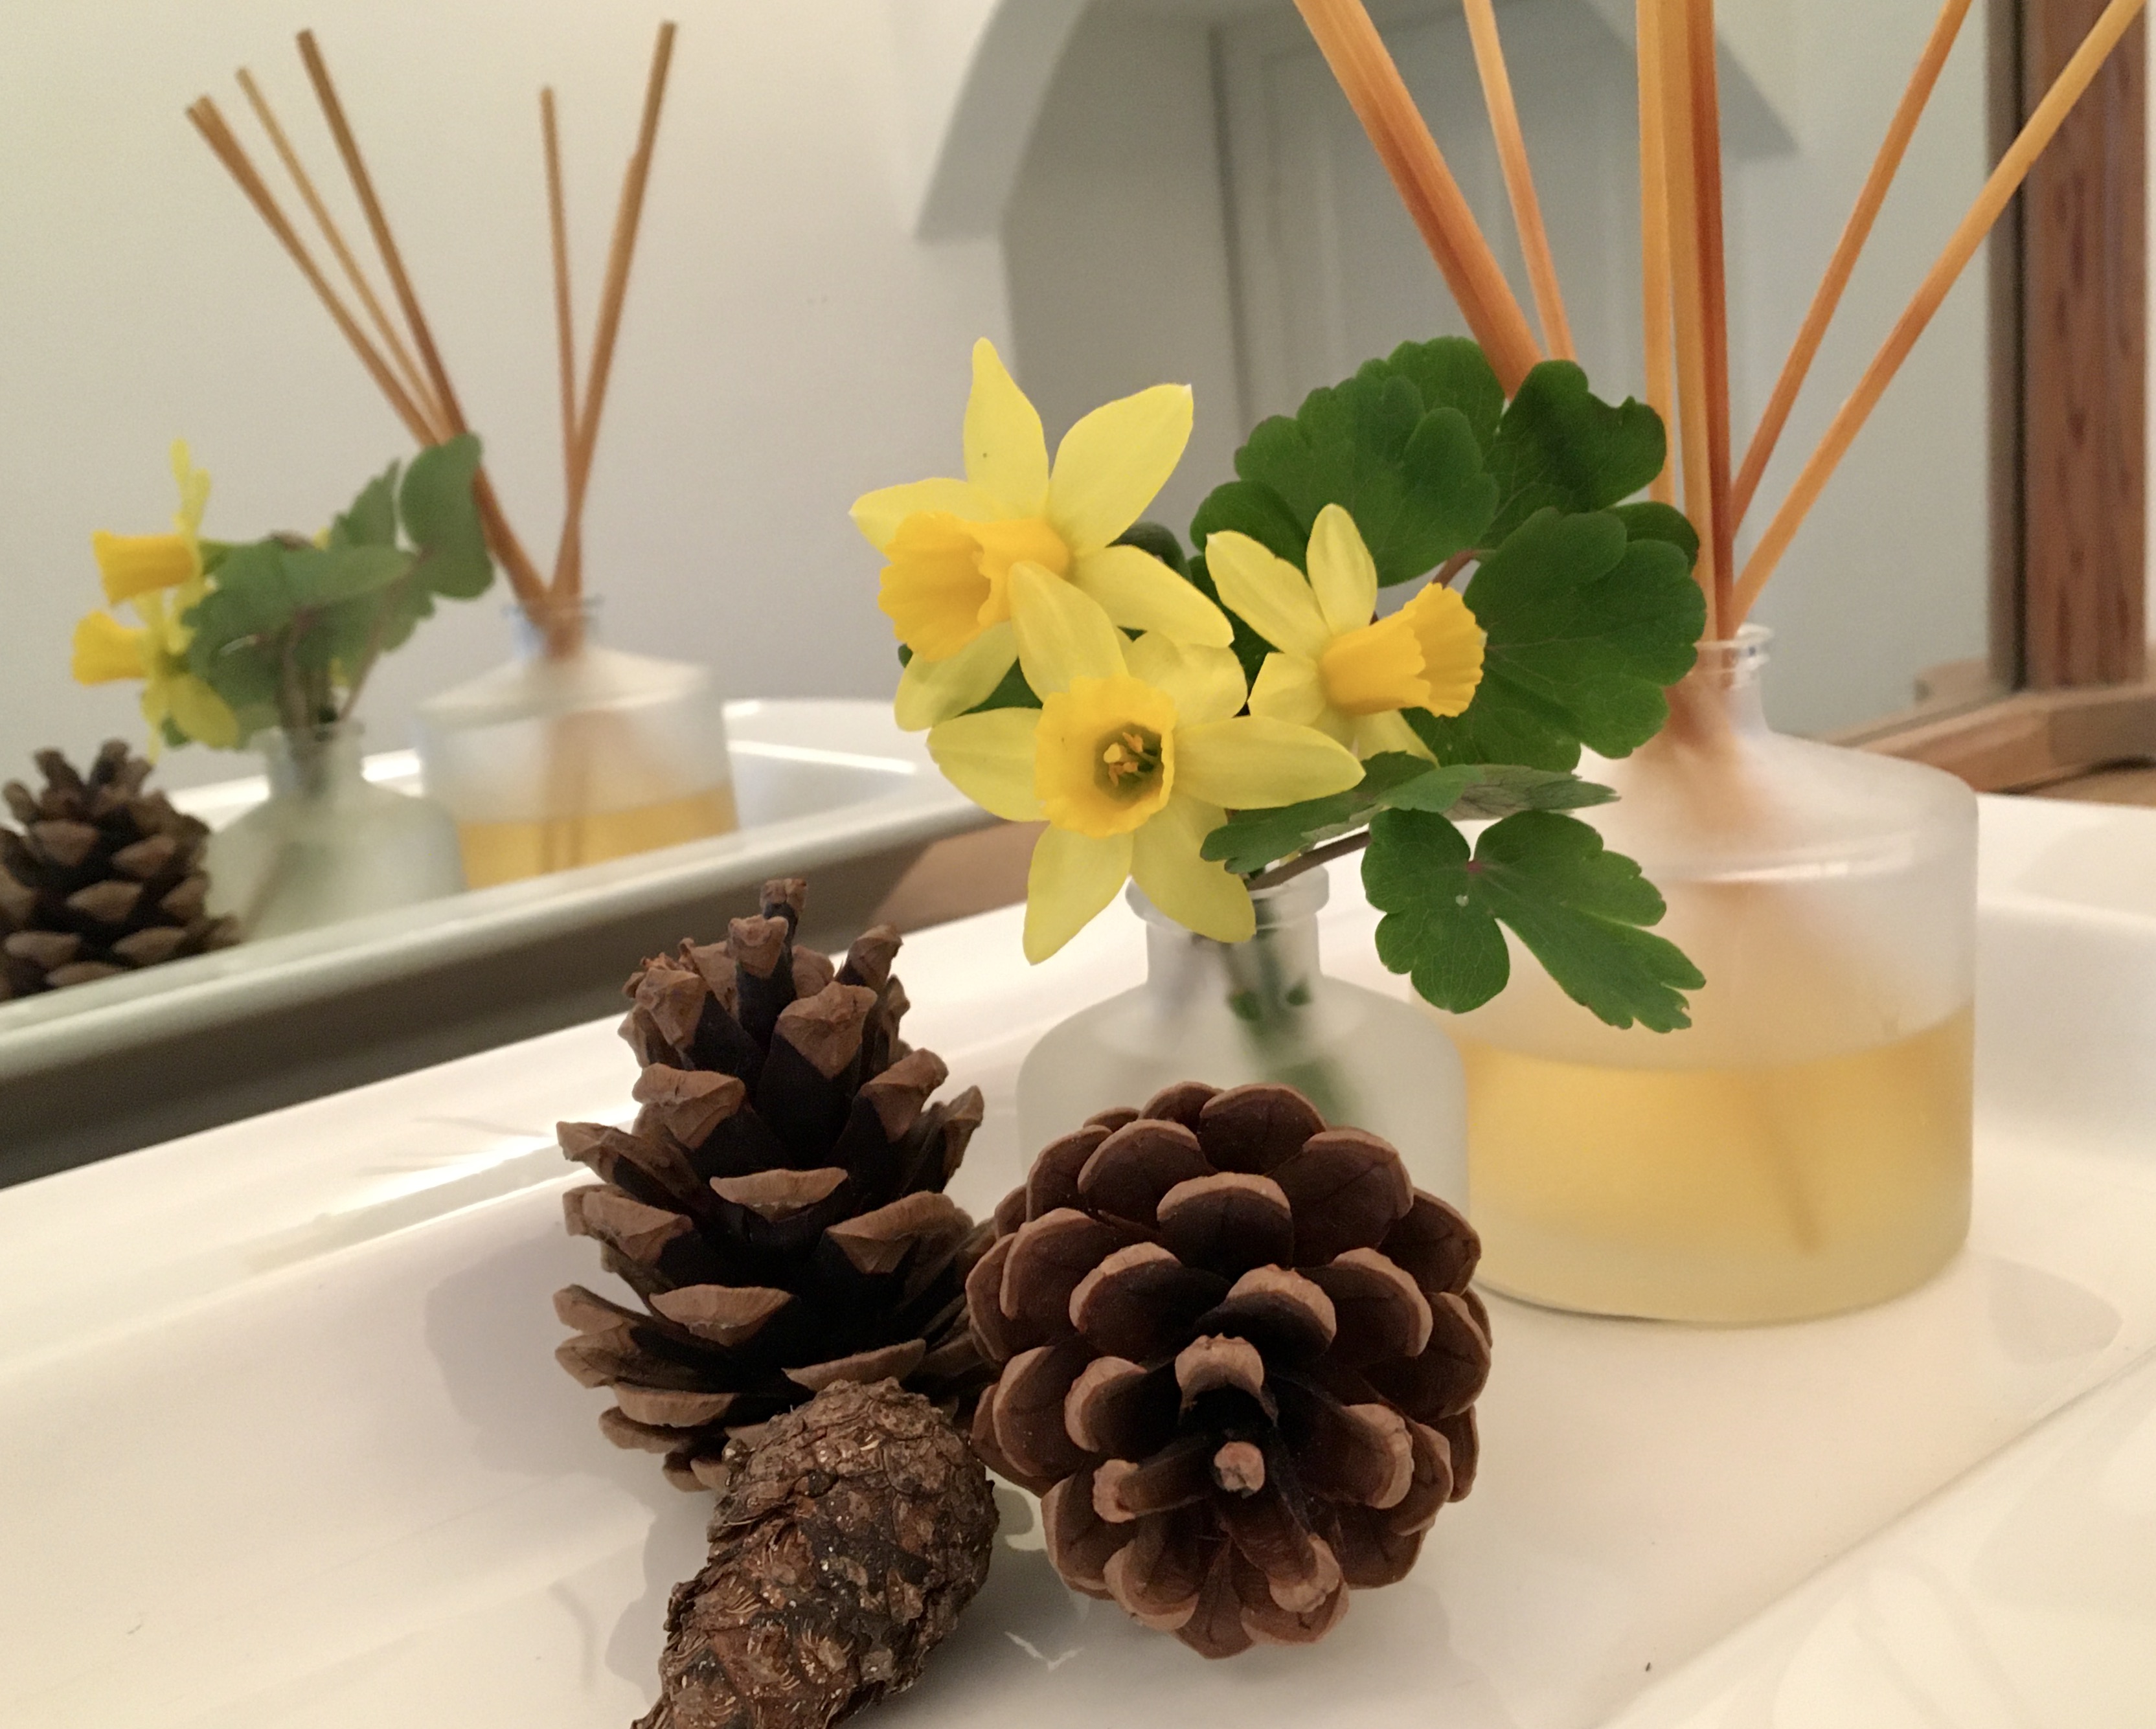 Daffodils and pine cones inside